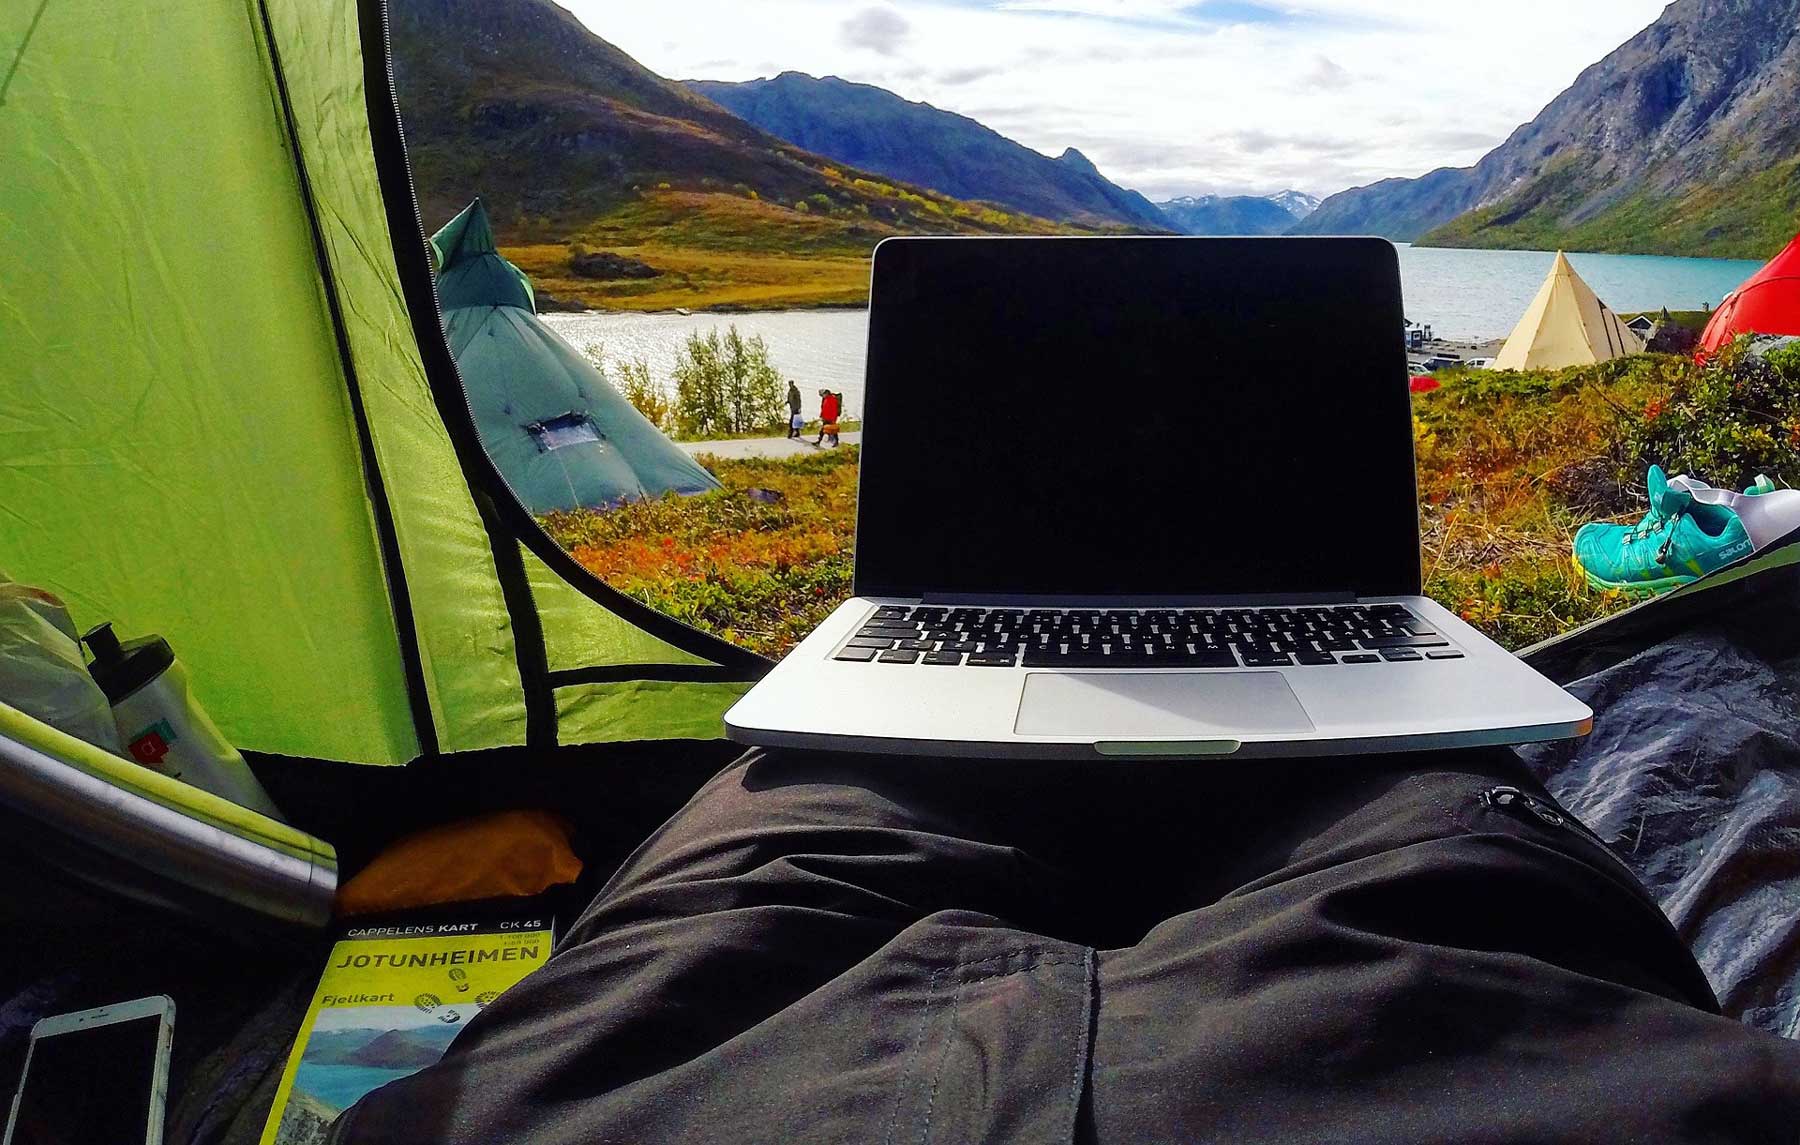 Laptop inside a camping tent